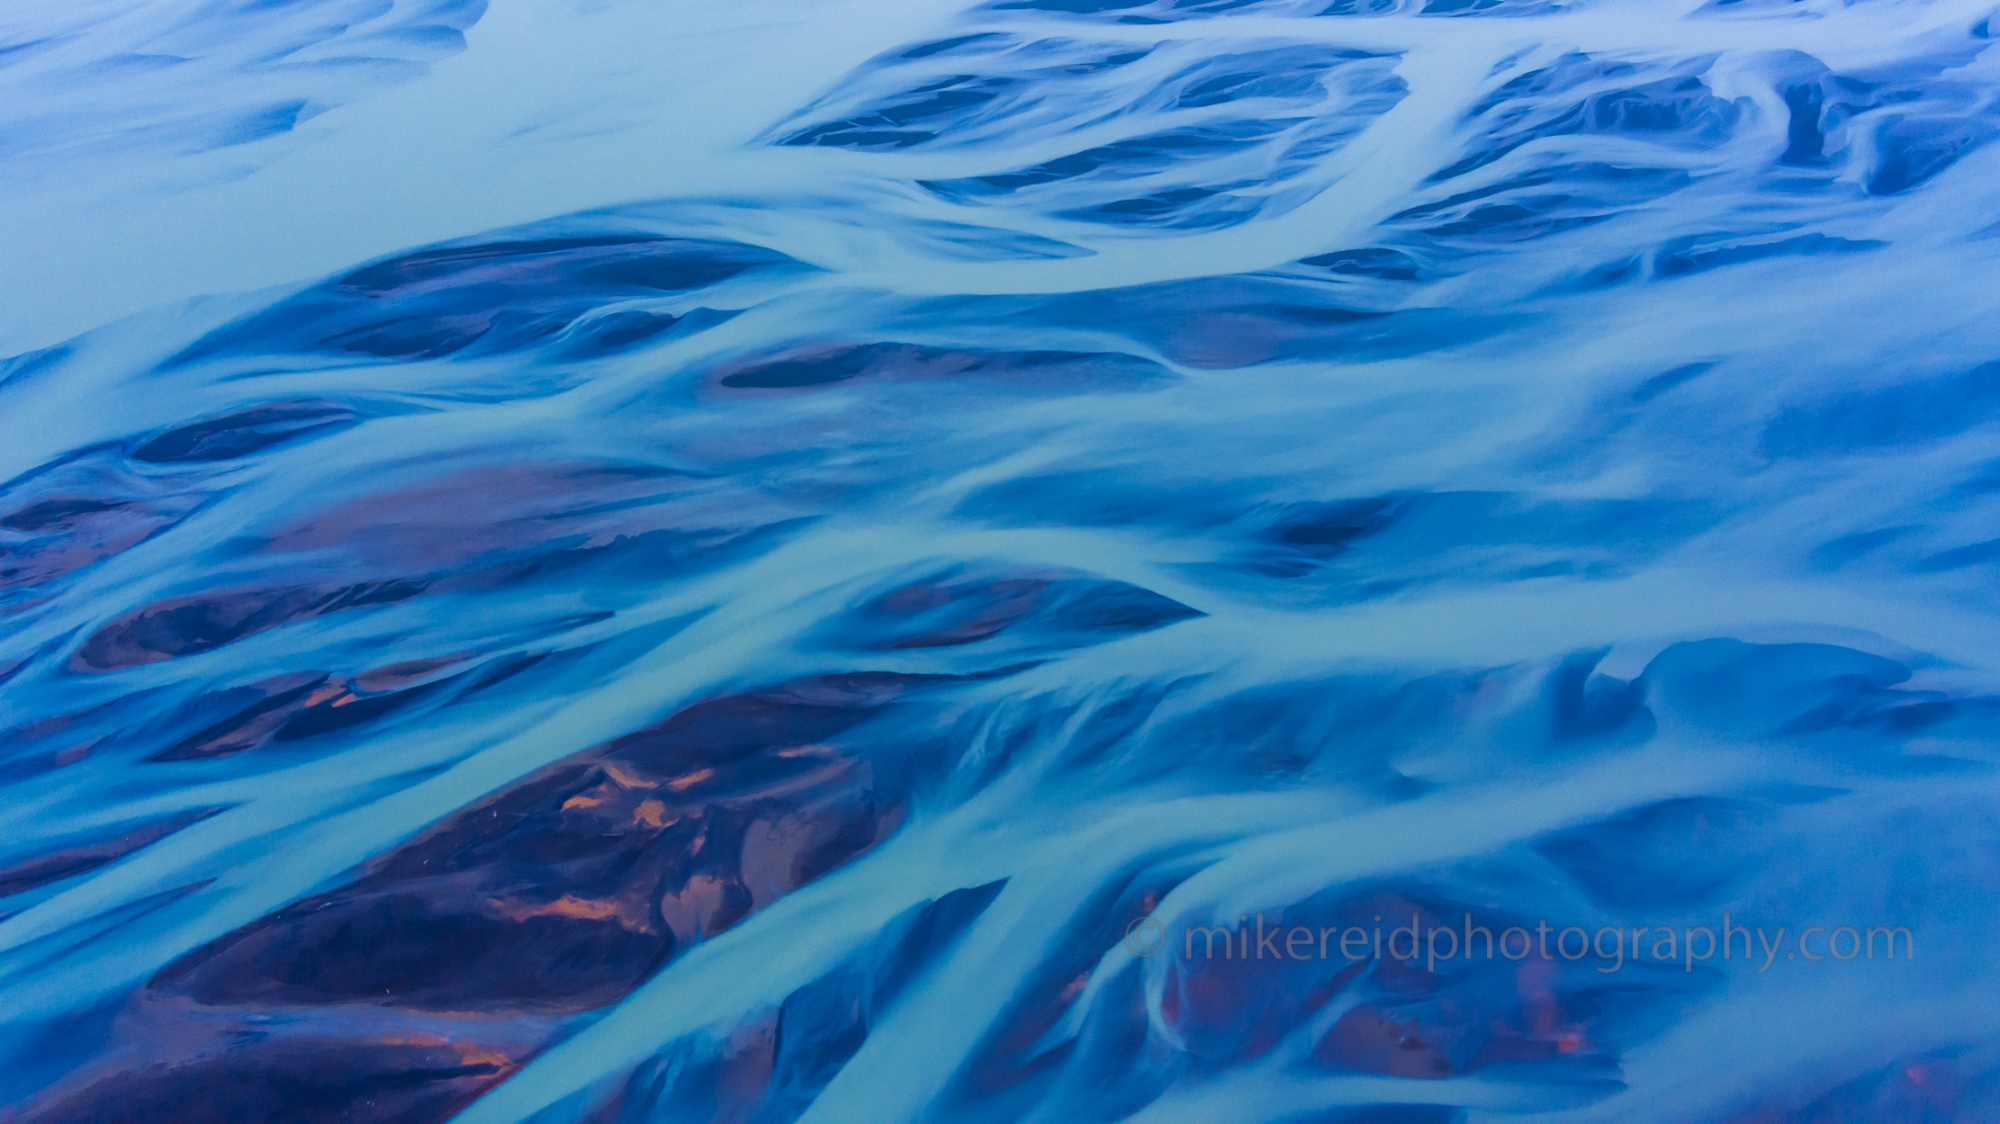 Over Iceland Braided Beach River Natures Abstract Art.jpg 